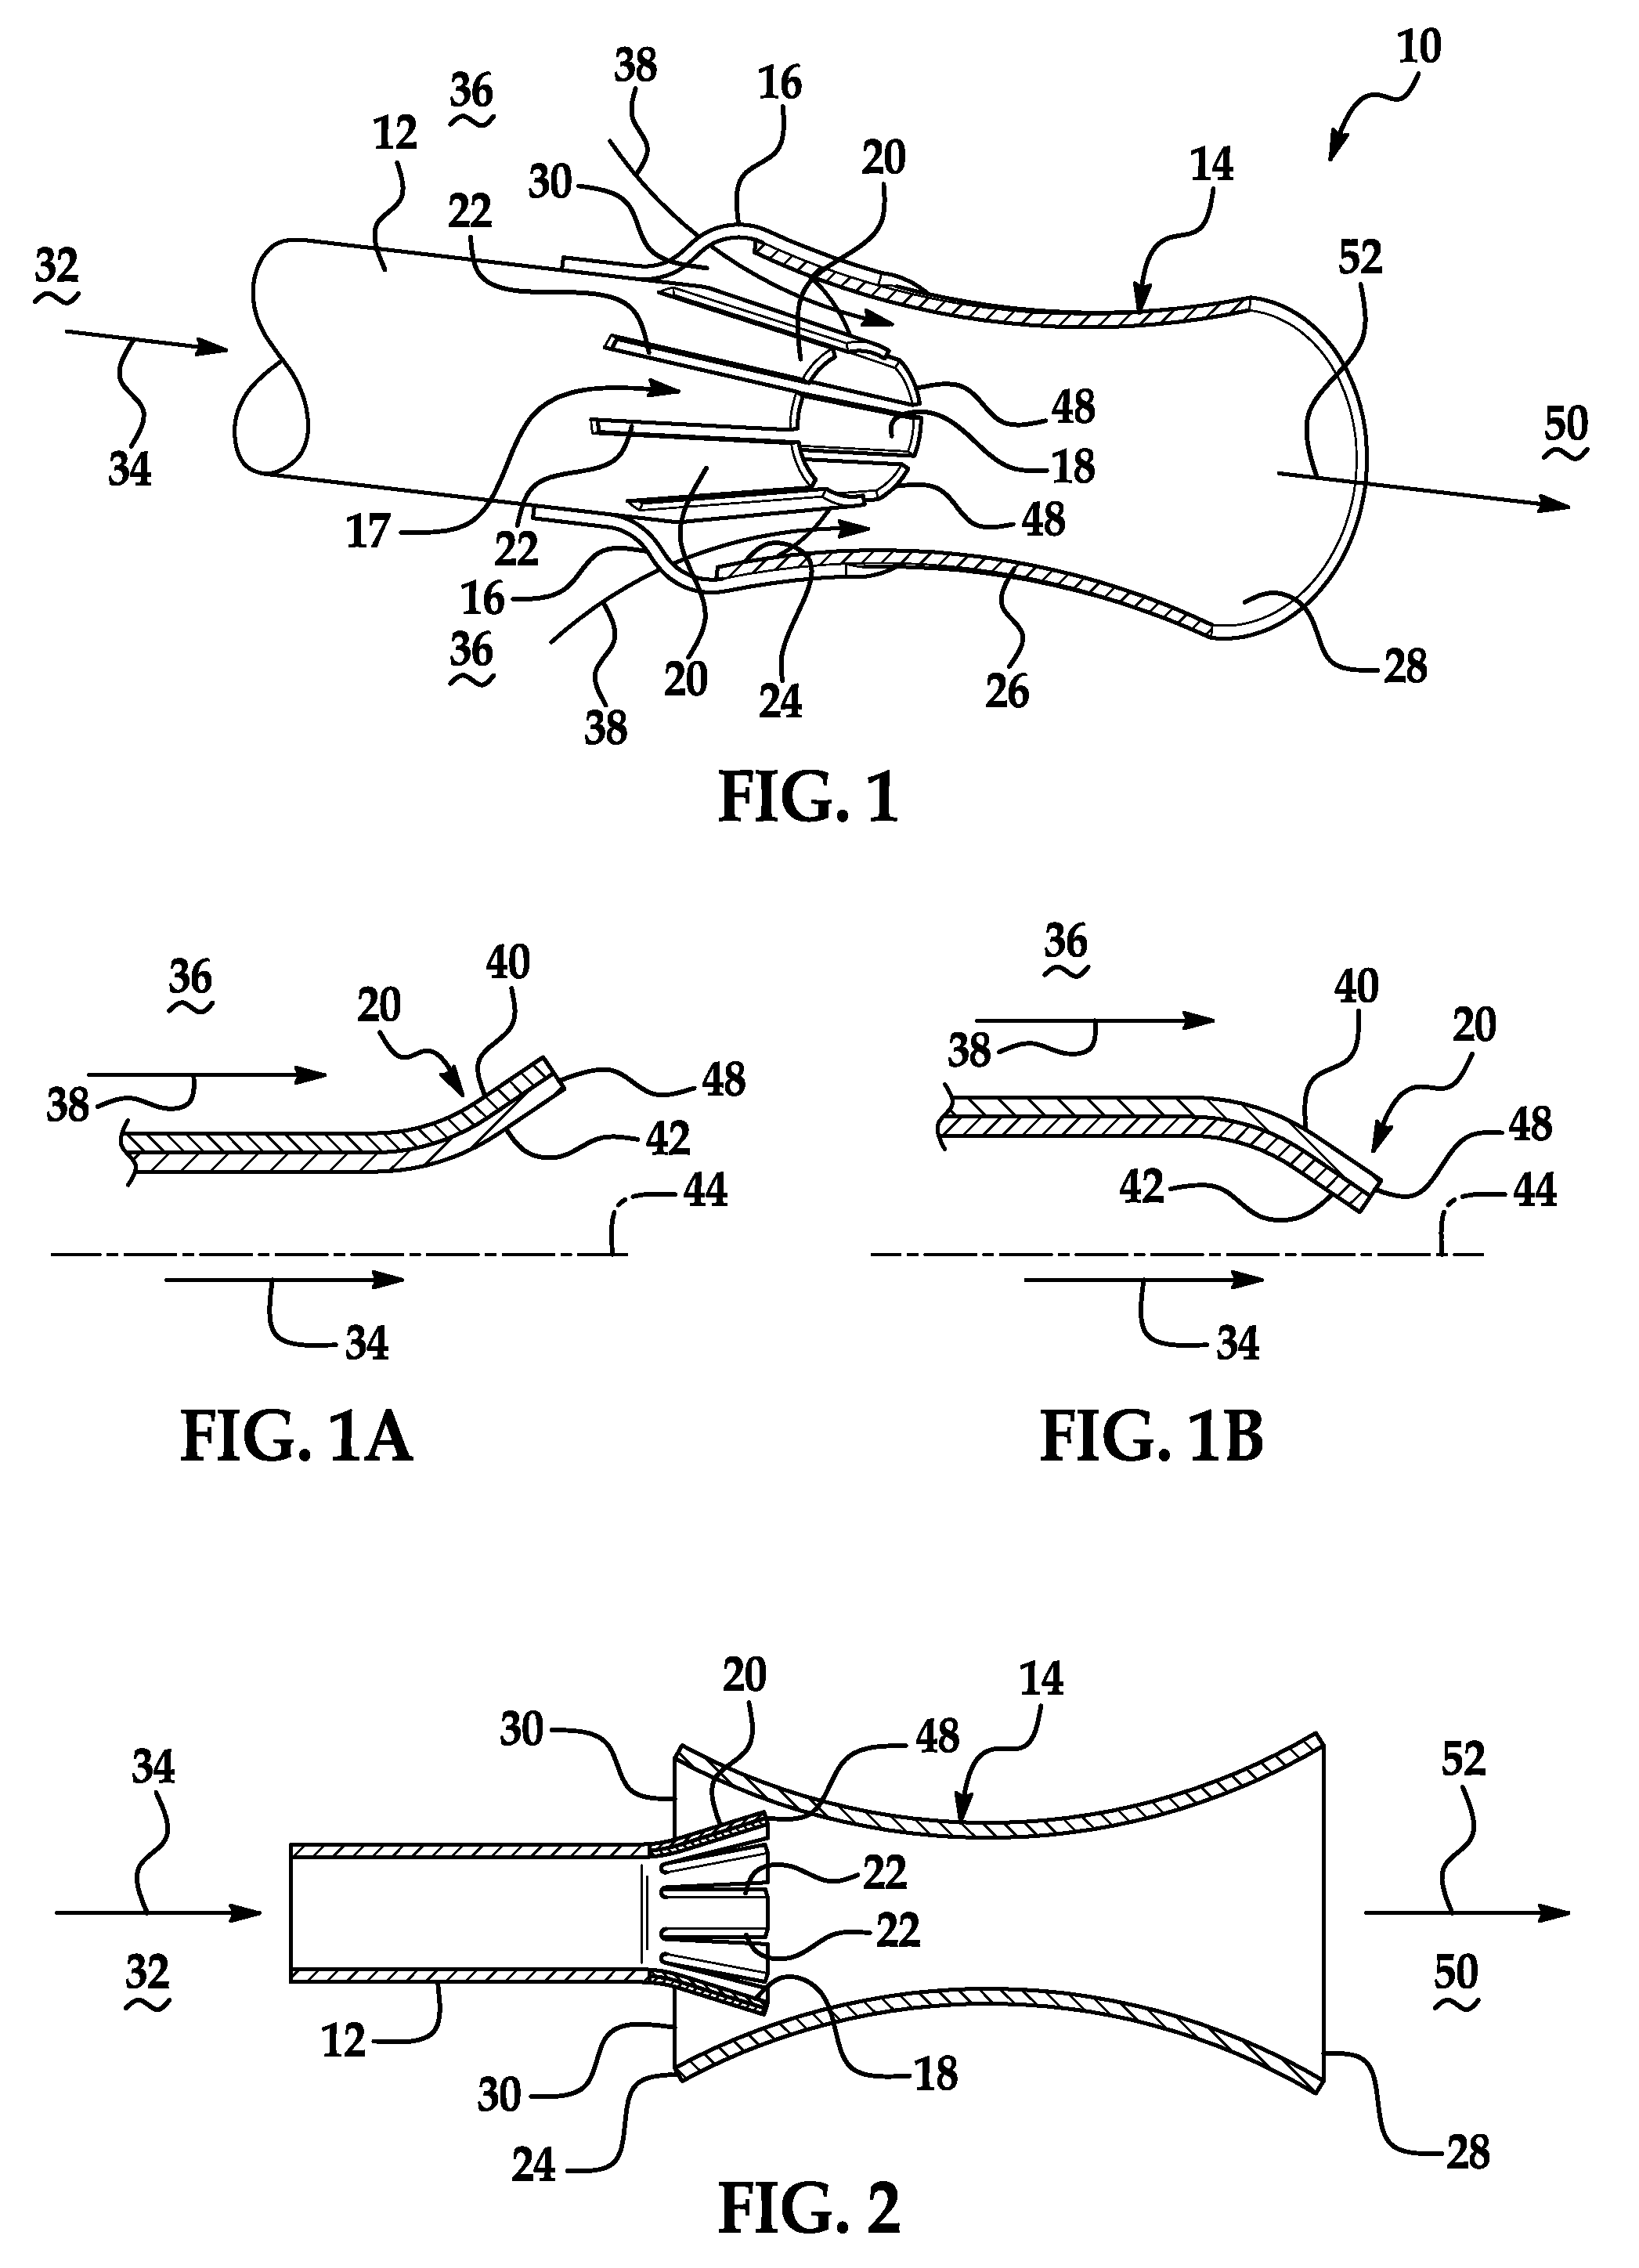 Apparatus and method for cooling an exhaust gas